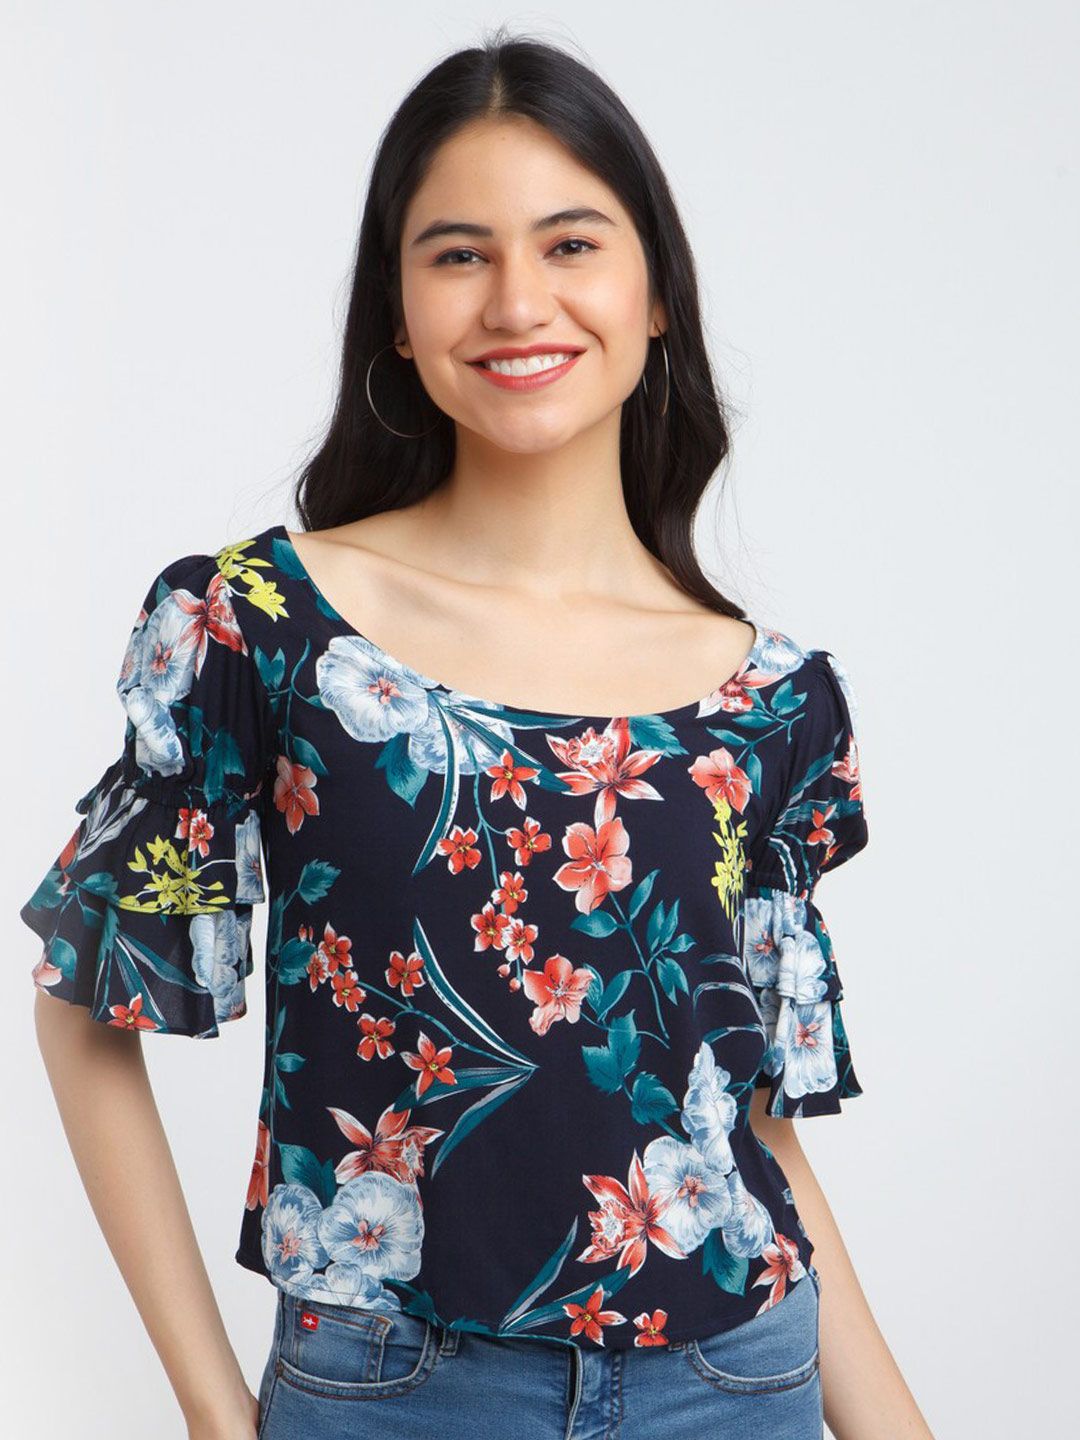 Zink London Blue Floral Print Top Price in India